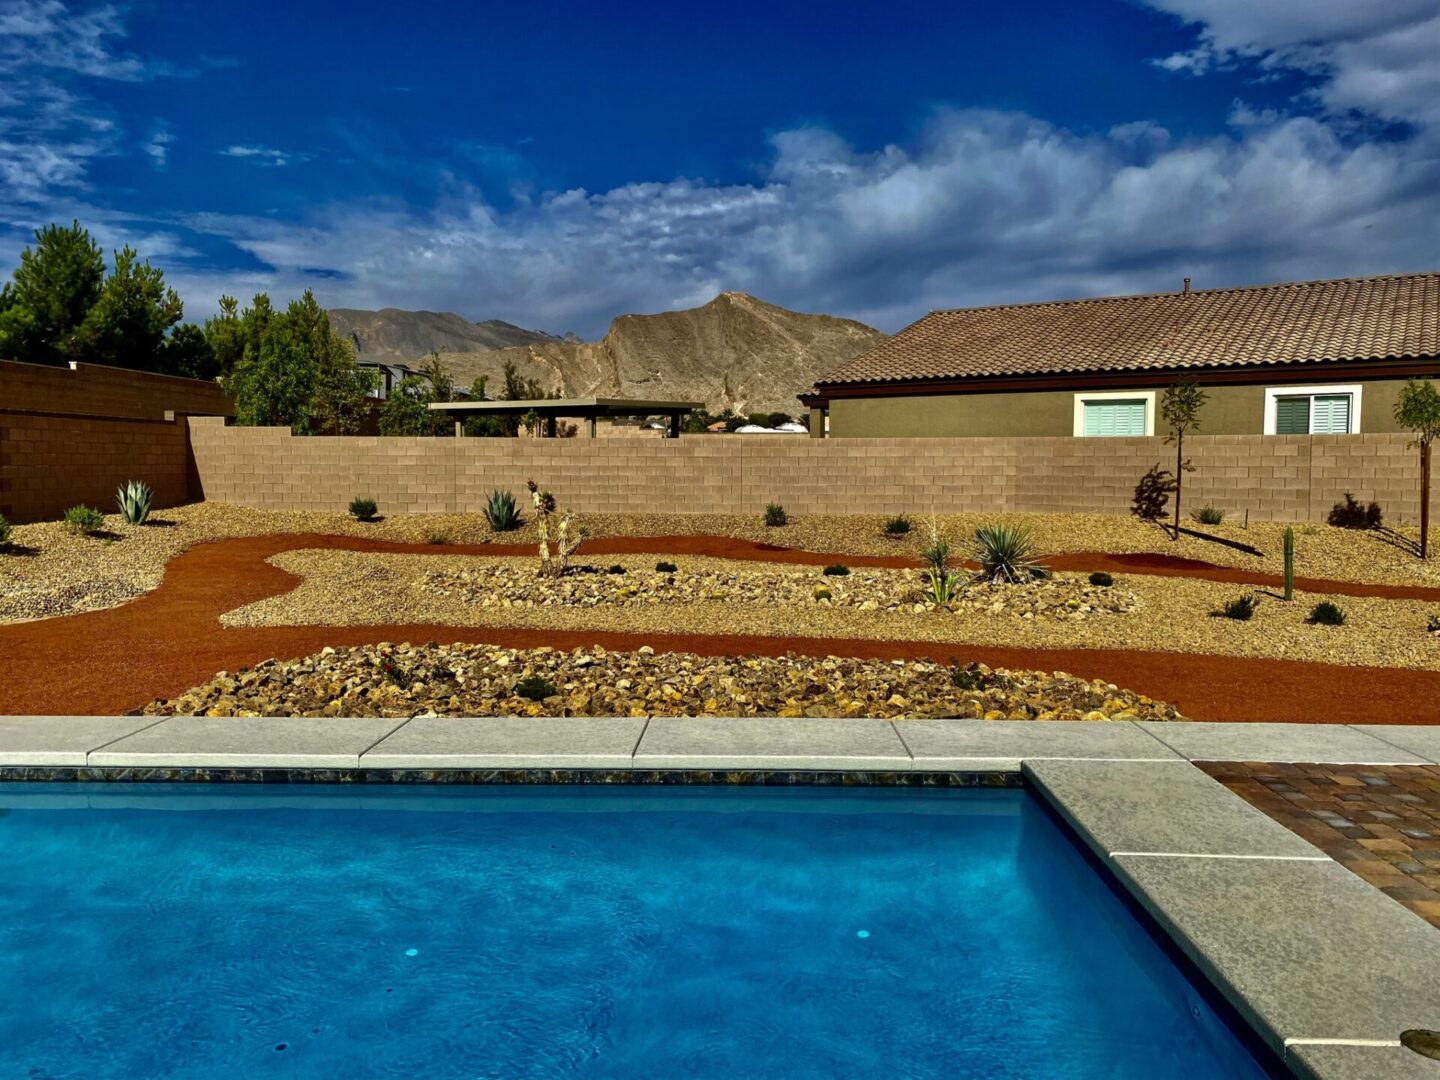 A pool with a view of the desert.